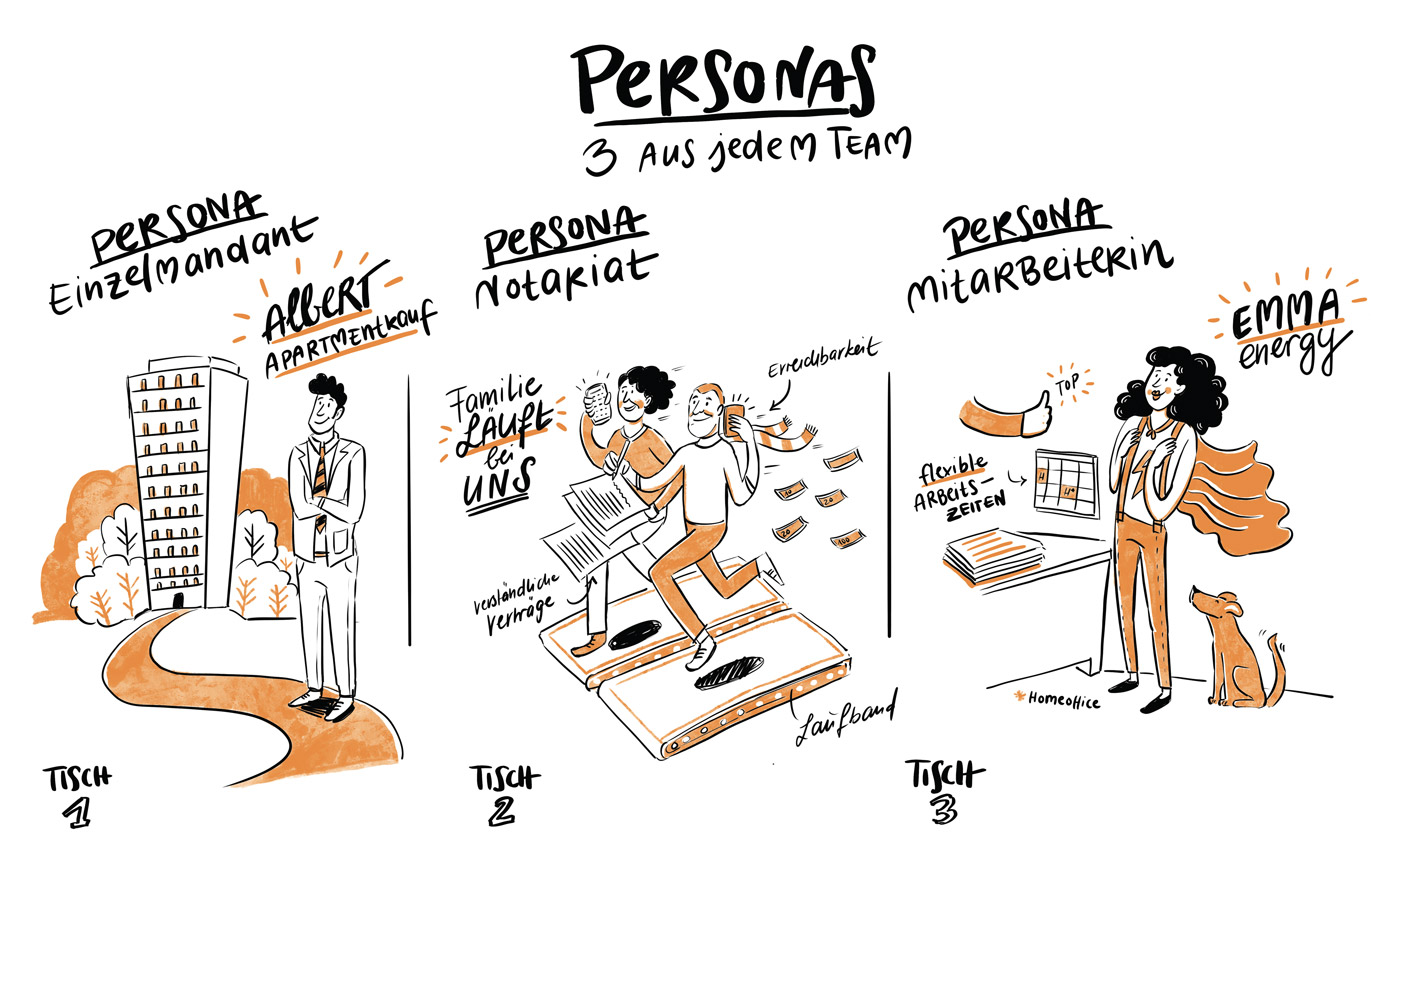 Notes from the workshop on personas